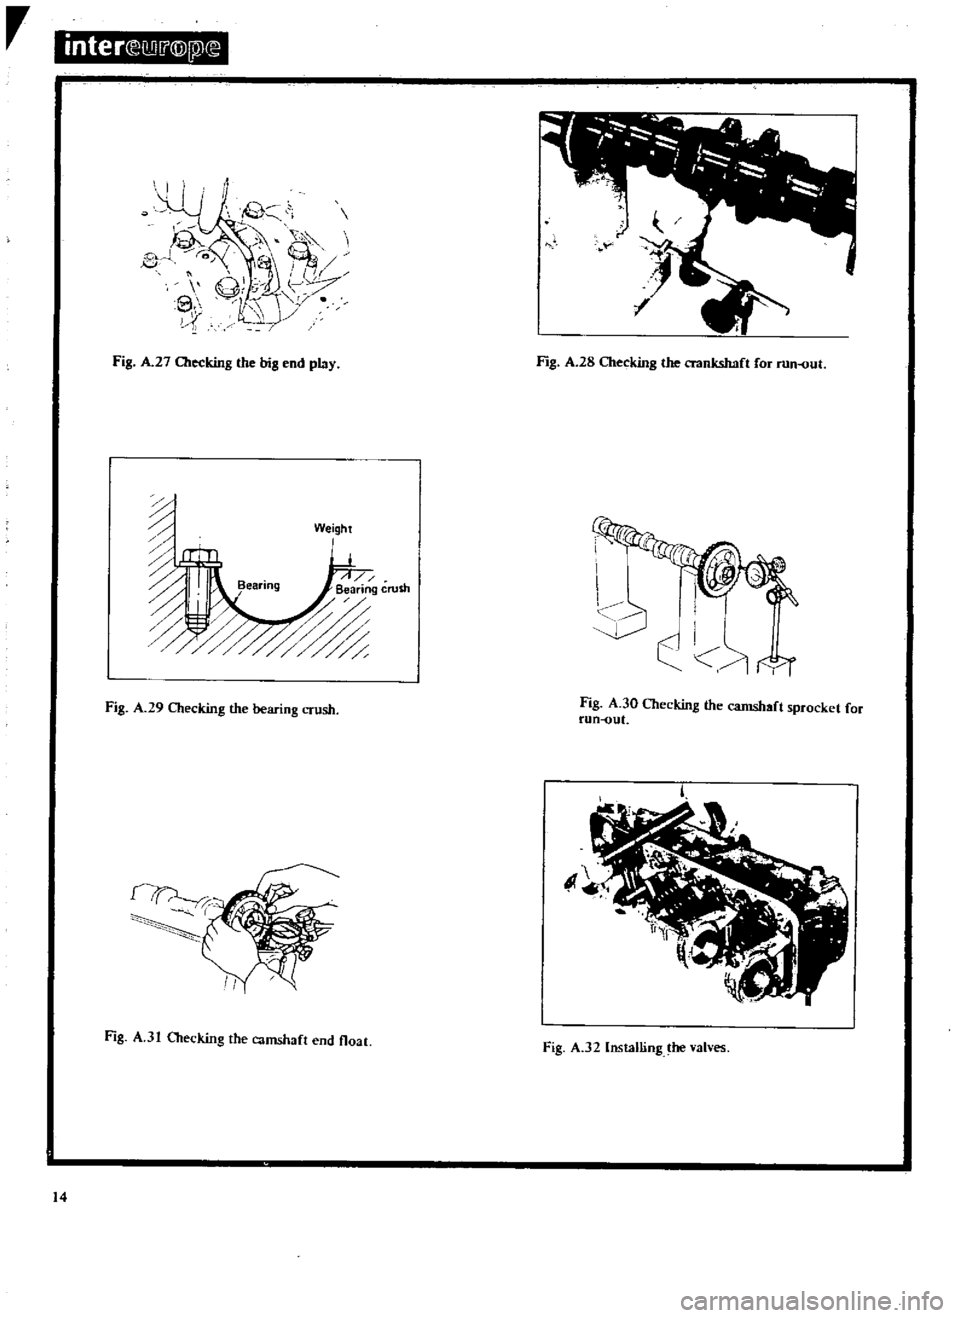 DATSUN 510 1969  Service User Guide 
inter 
Q1I
f 
Q

I
ll

oJ

Fig 
A 
27

Olecking 
the

big 
end

play 
Fig 
A 
28

Checking 
the 
crankshaft 
for 
run
out

Weight

Fig 
A 
29

Checking 
the

bearing 
crush 
Fig 
A
30

Checking 
the 